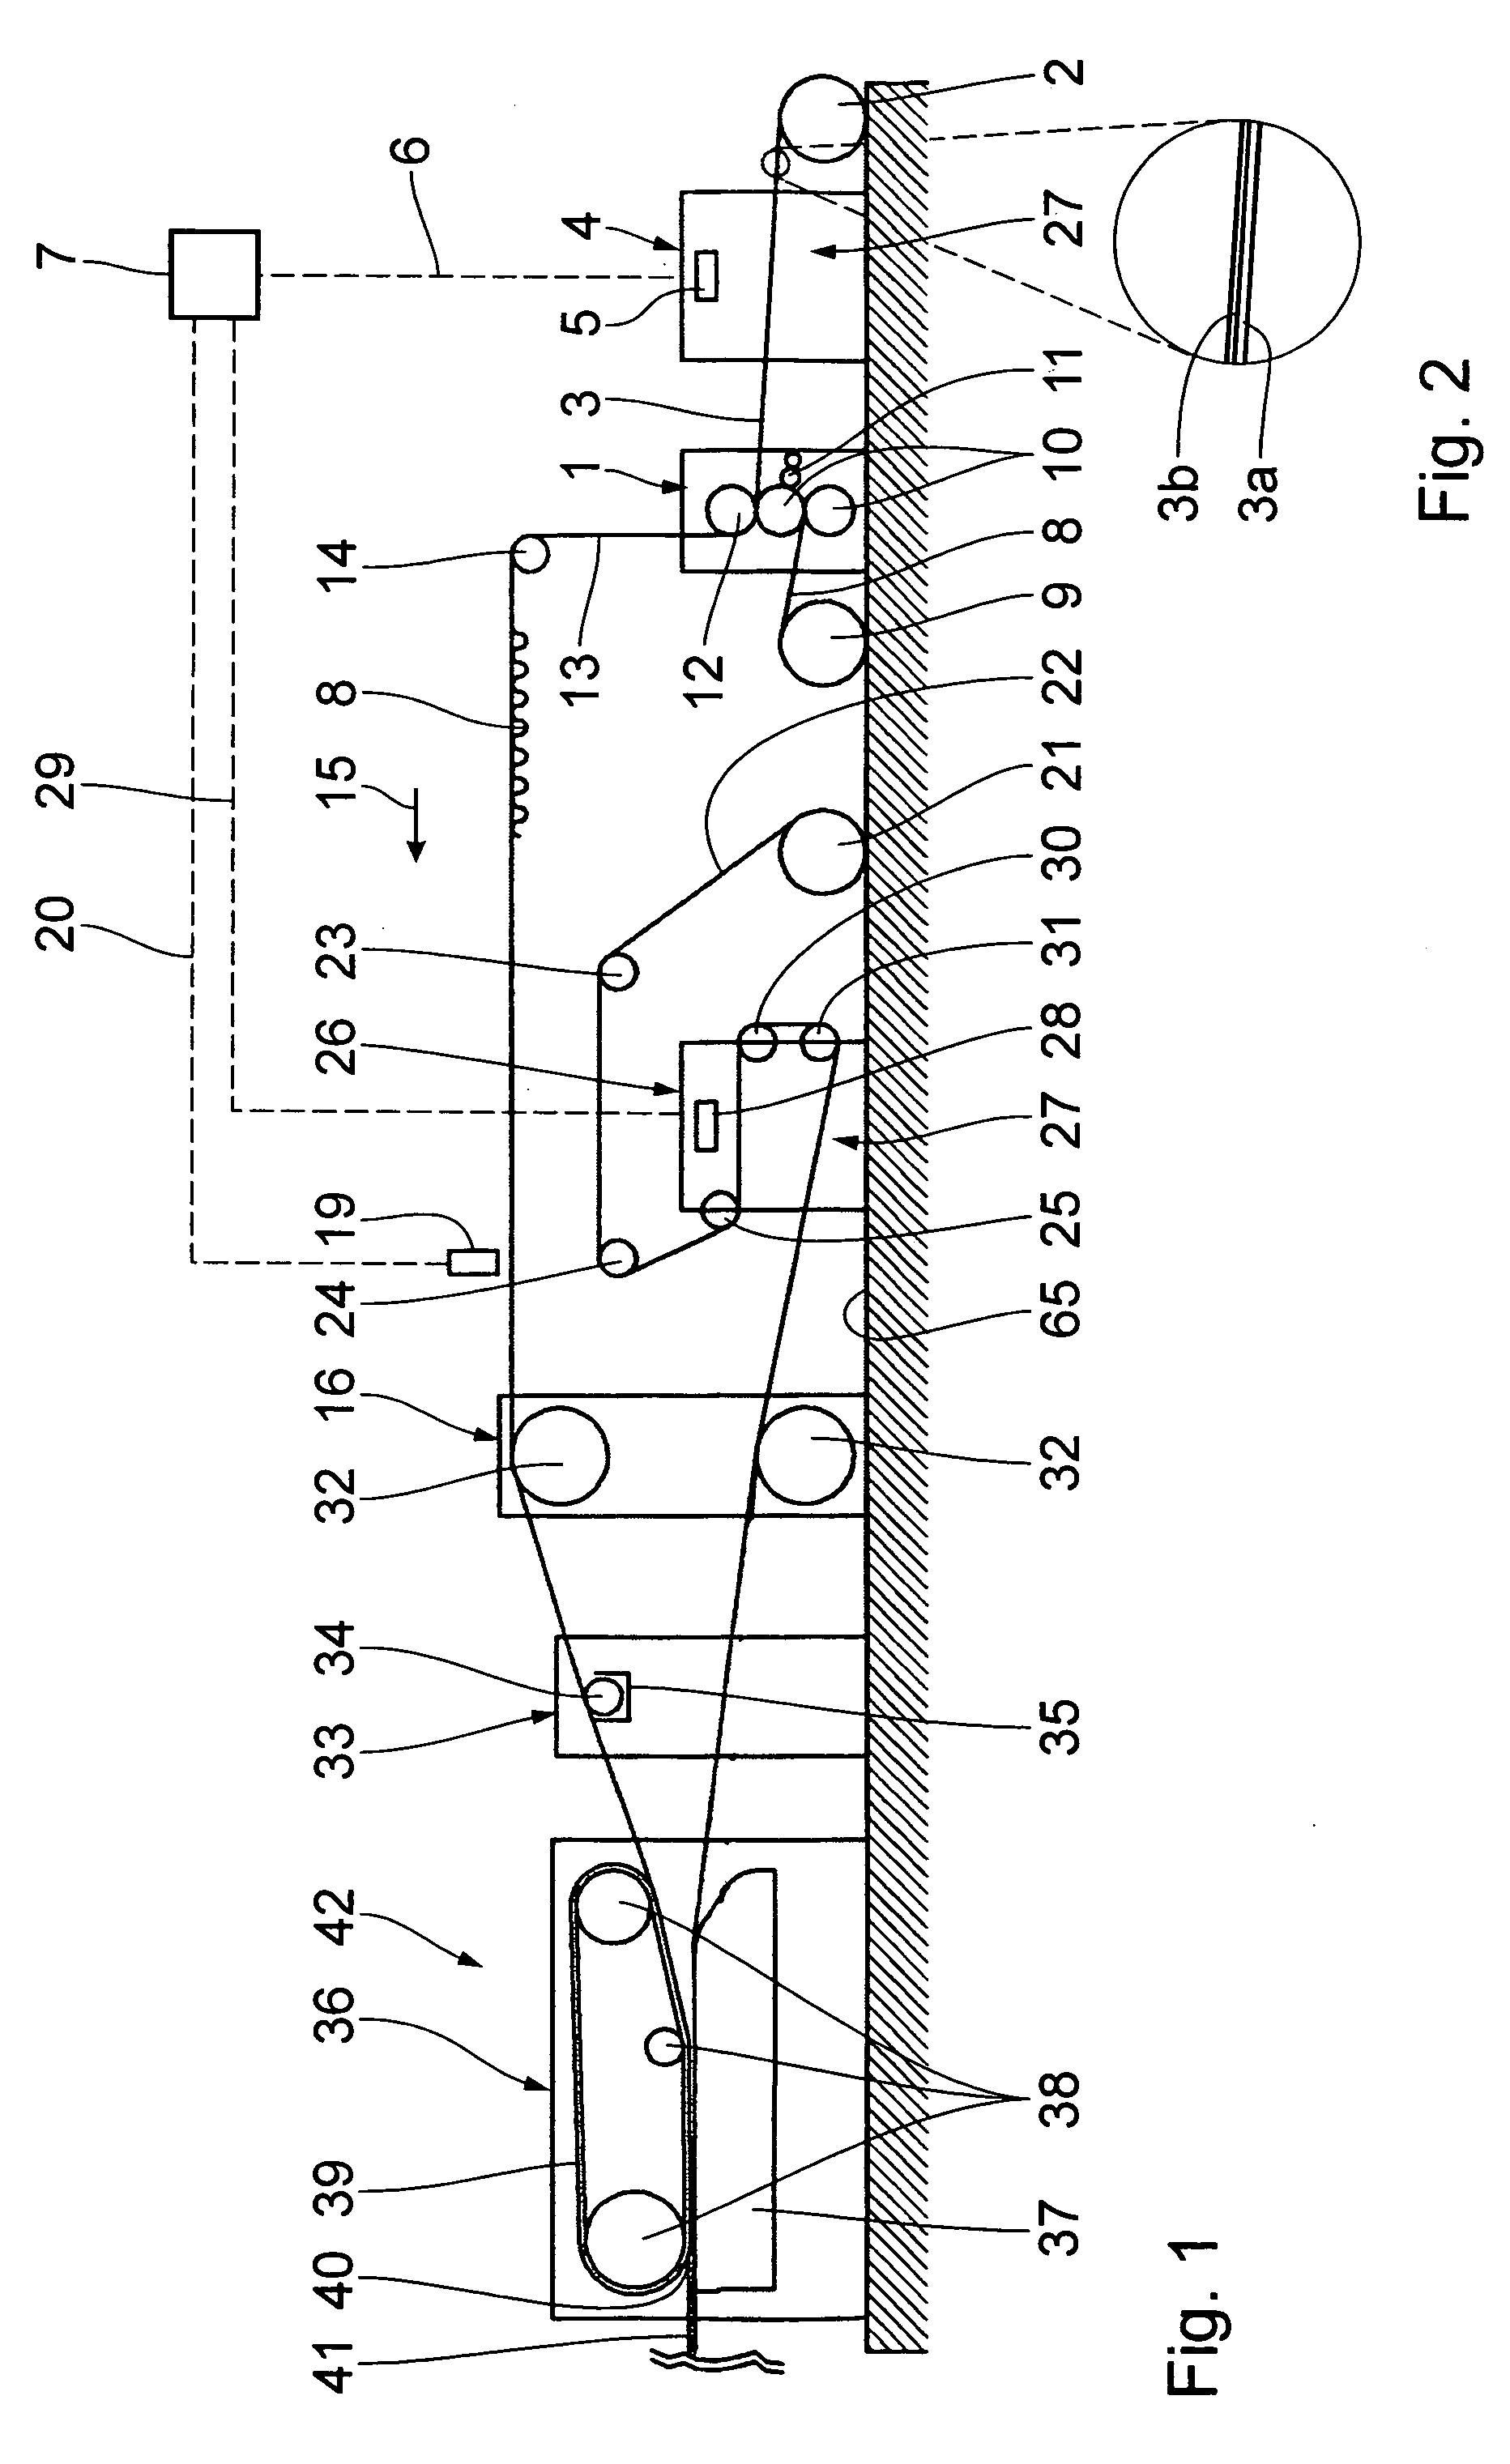 Method for the manufacture of corrugated board